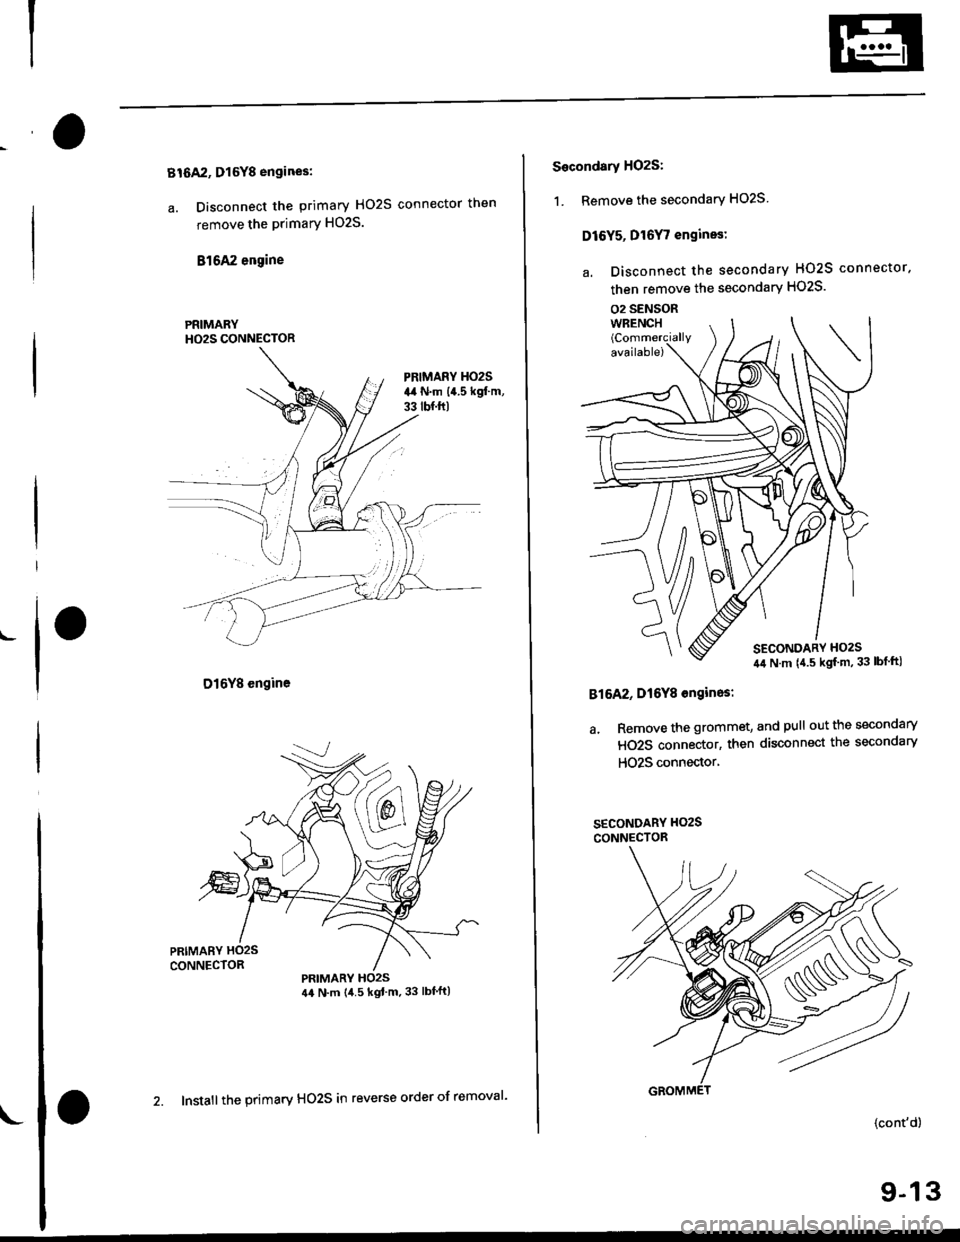 HONDA CIVIC 1996 6.G Workshop Manual Bt6A2, Dl6Y8 engines:
a. Disconnect the primary HO2S connector then
remove the primary HO2S.
816A2 engine
D16Y8 engine
PRIMARYH02S CONNECTOR
PRIMARY HO2S44 N.m {4.5 kgtm.33 lbfft)
L
2. Install the p